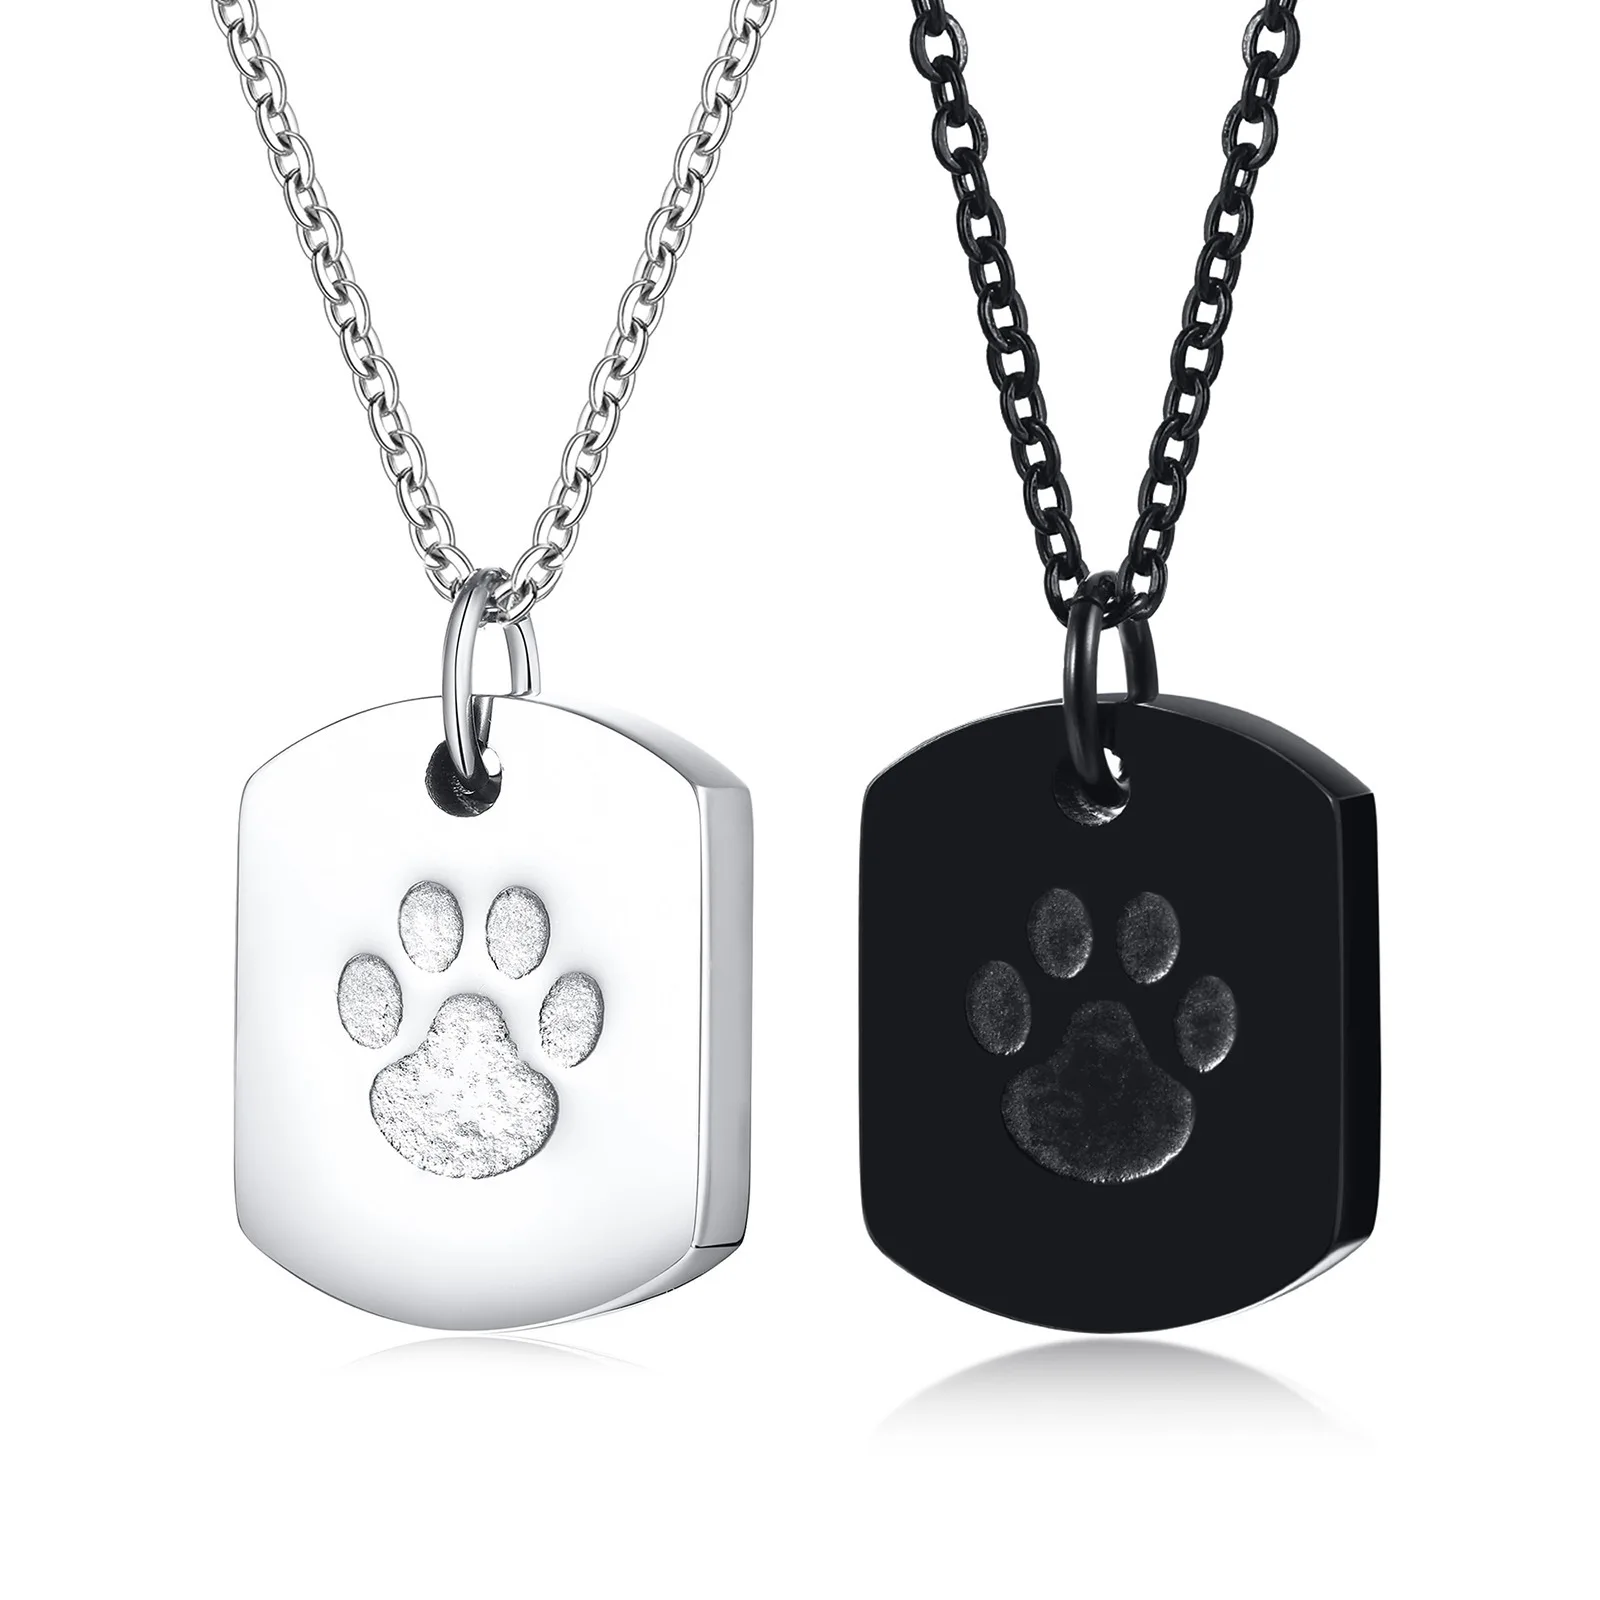 

Stainless Steel Pet Paw Print Memorial Cat Dog Ashes Cremation Open Necklace Keepsake Jewelry PN-1441